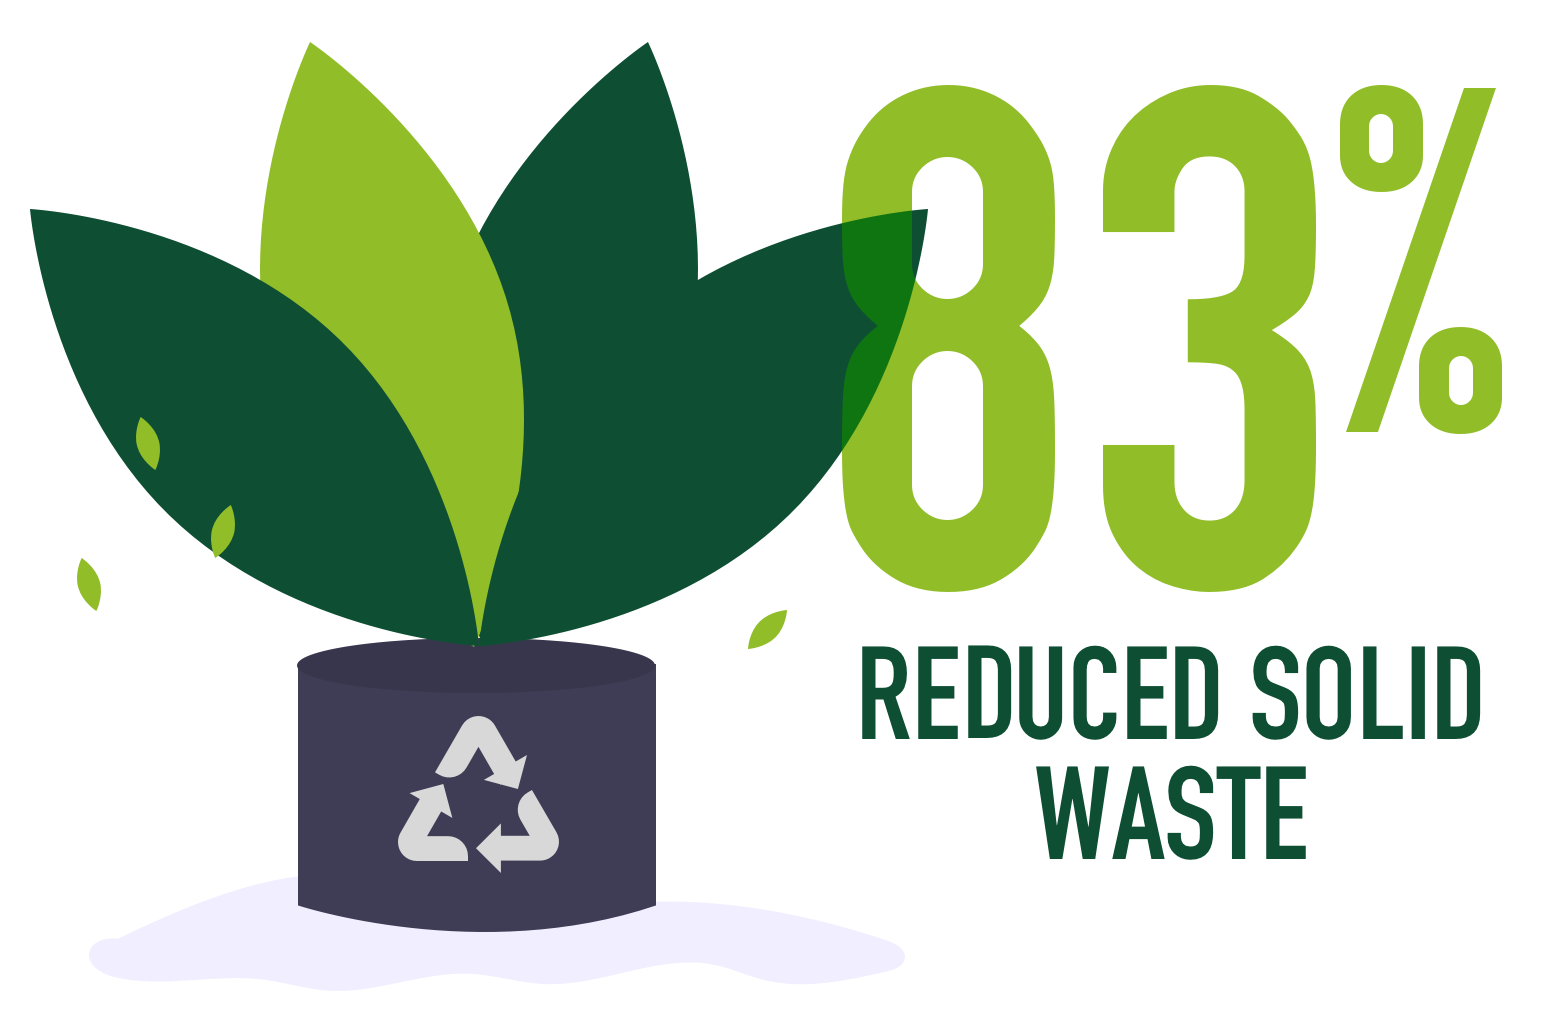 83% Reduced Solid Waste